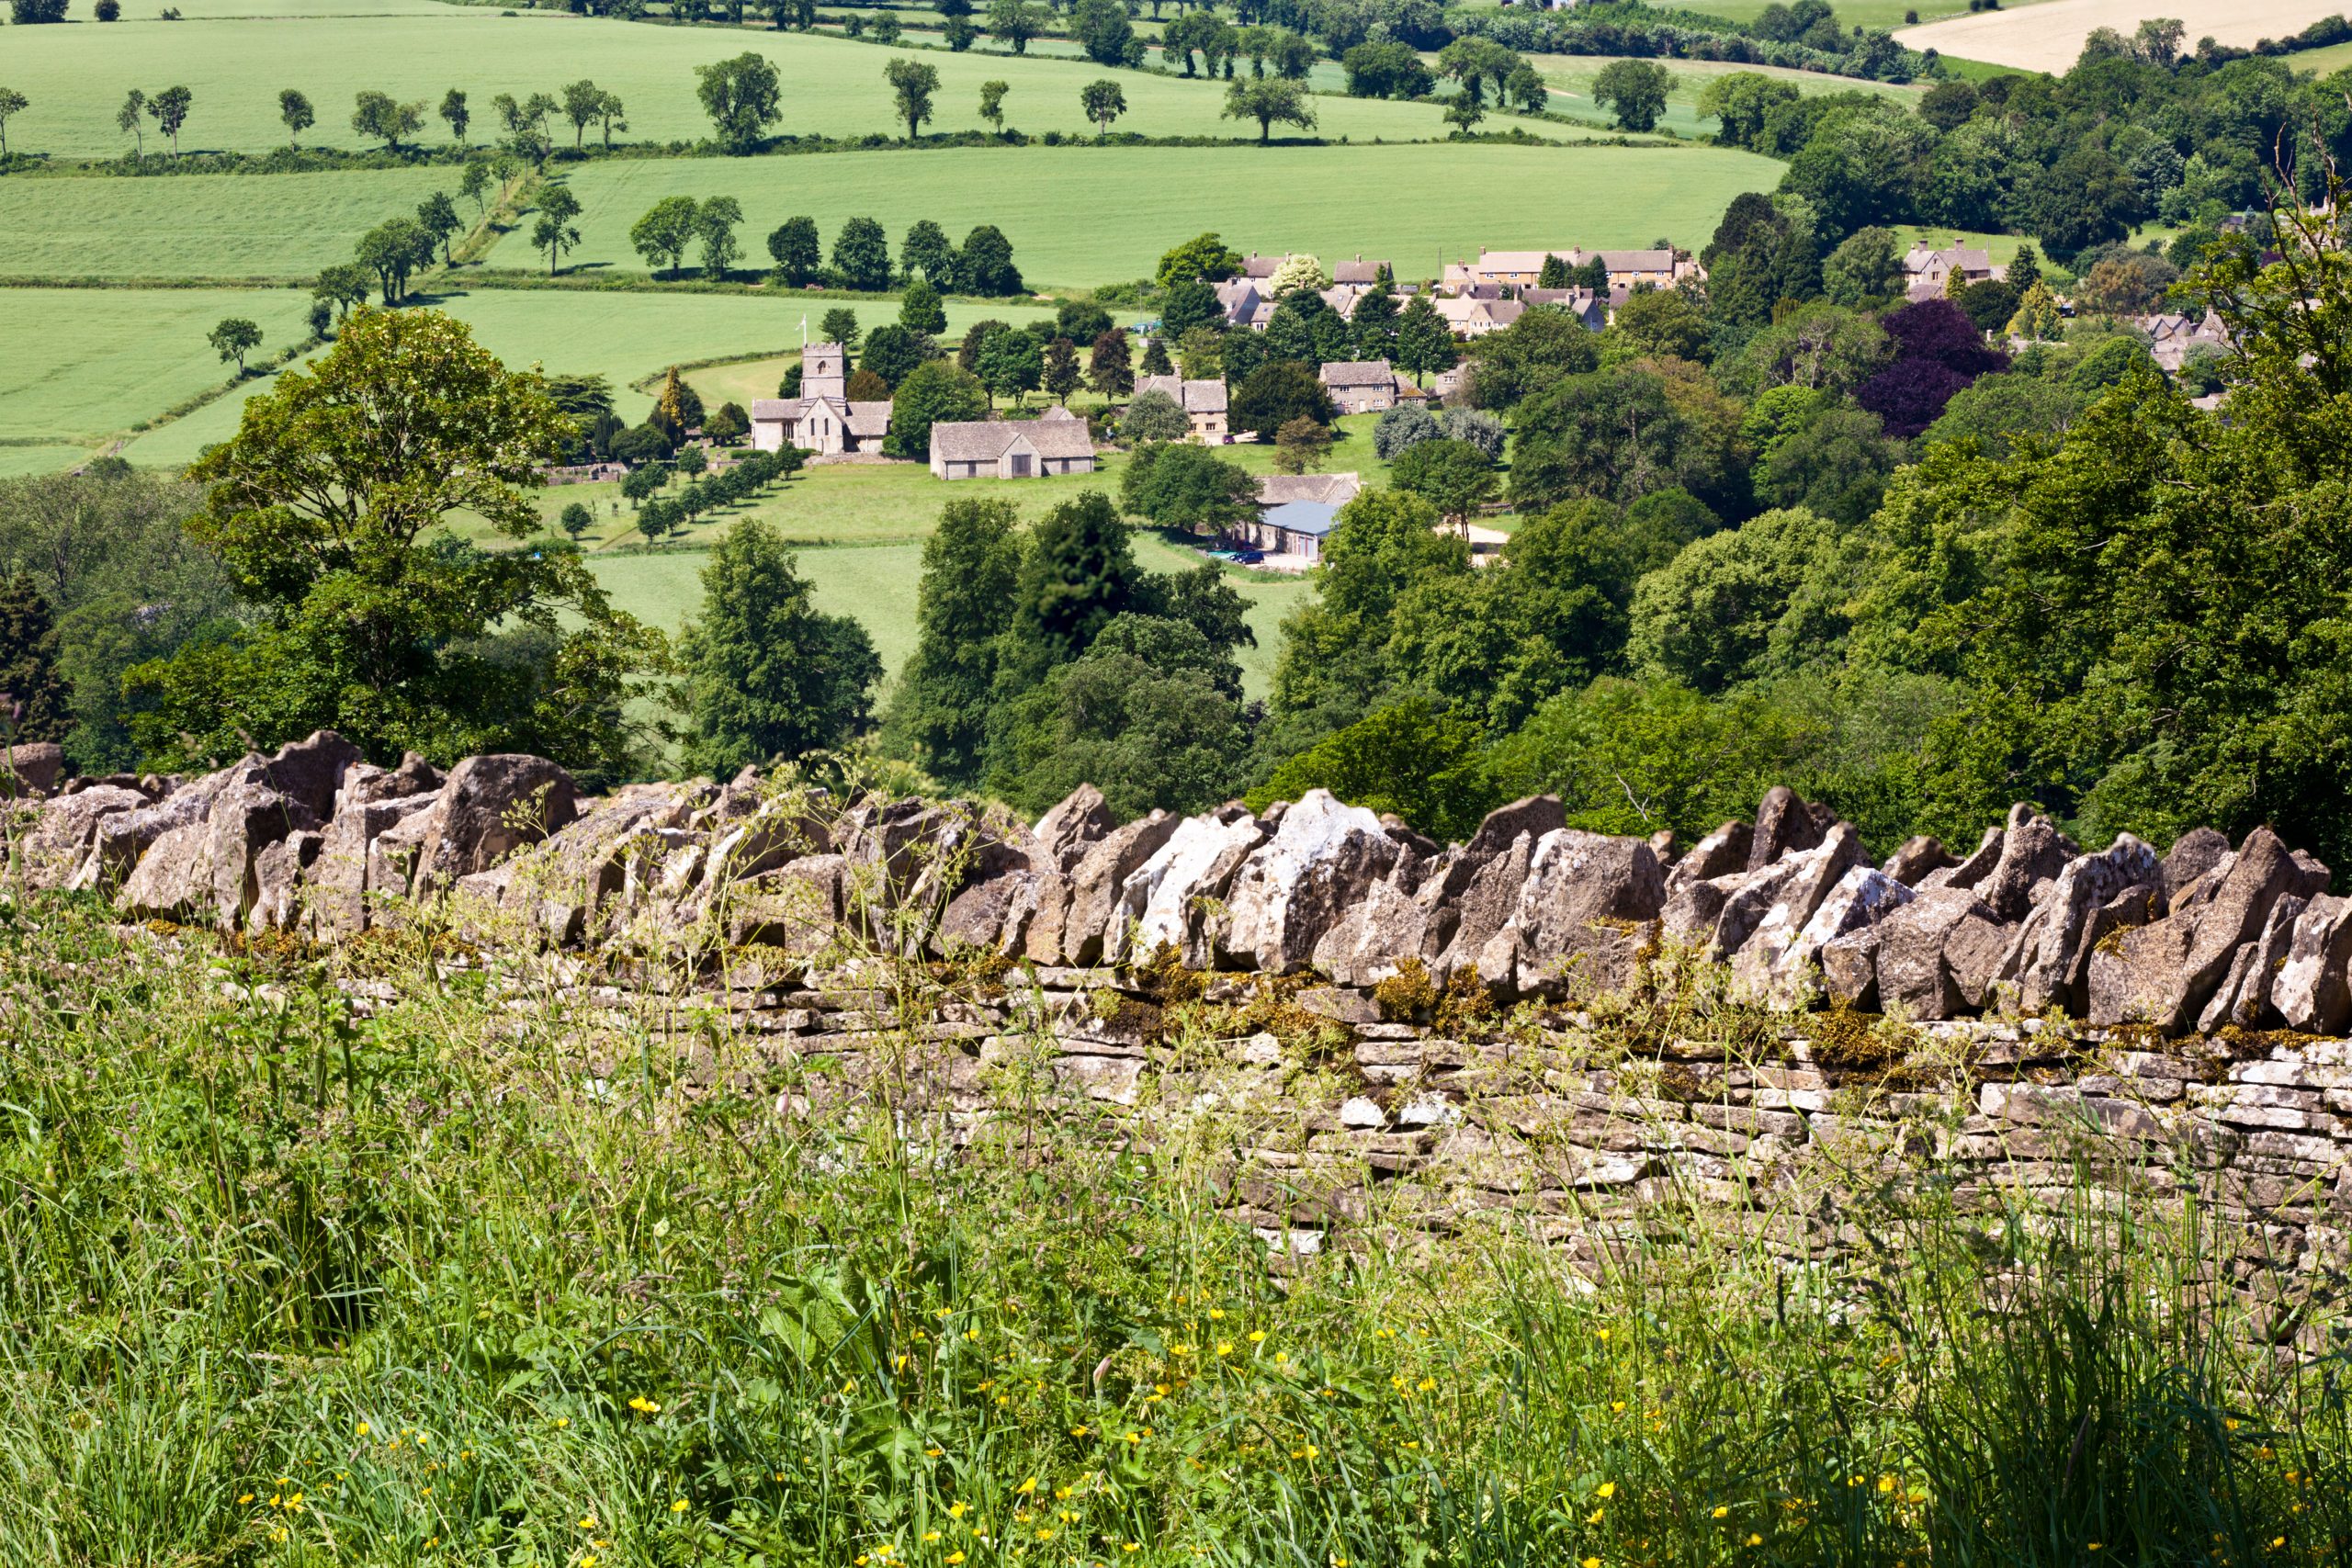 A driving tour of the Cotswolds: Chickens, sheep, and dry-stone walls as long as the Great Wall of China